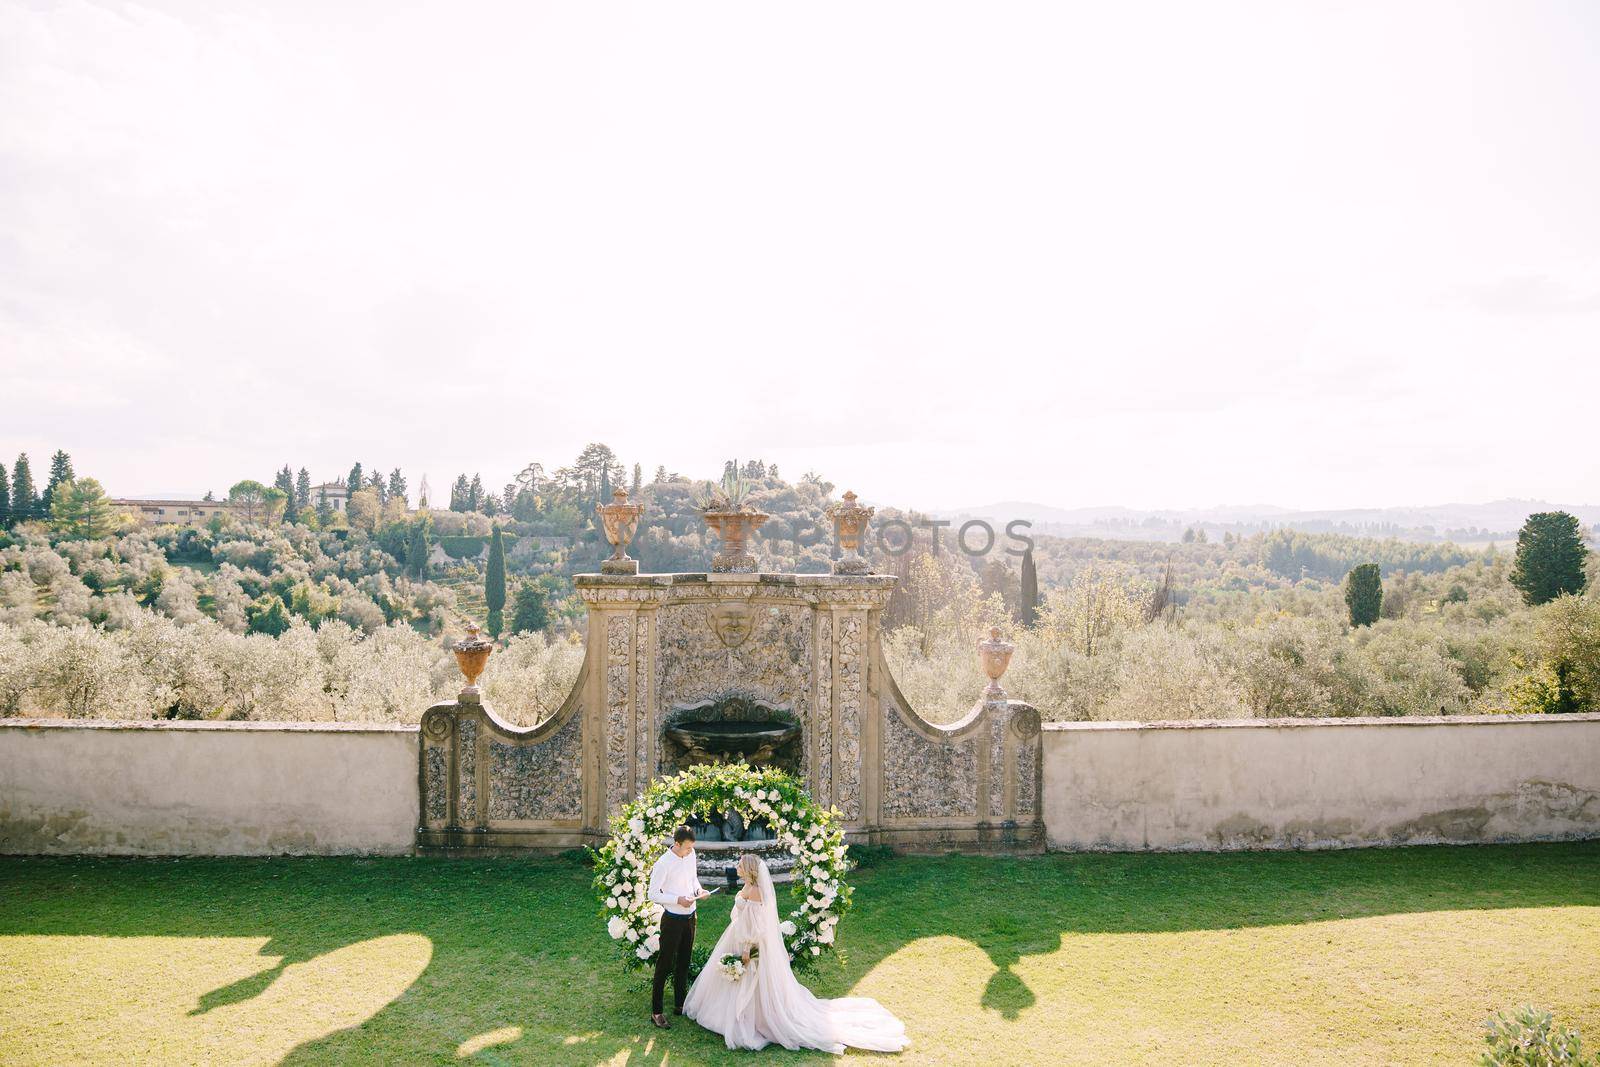 Florence, Italy - 02 october 2019: Wedding at an old winery villa in Tuscany, Italy. Wedding couple under a round arch of flowers. The groom reads wedding vows. by Nadtochiy